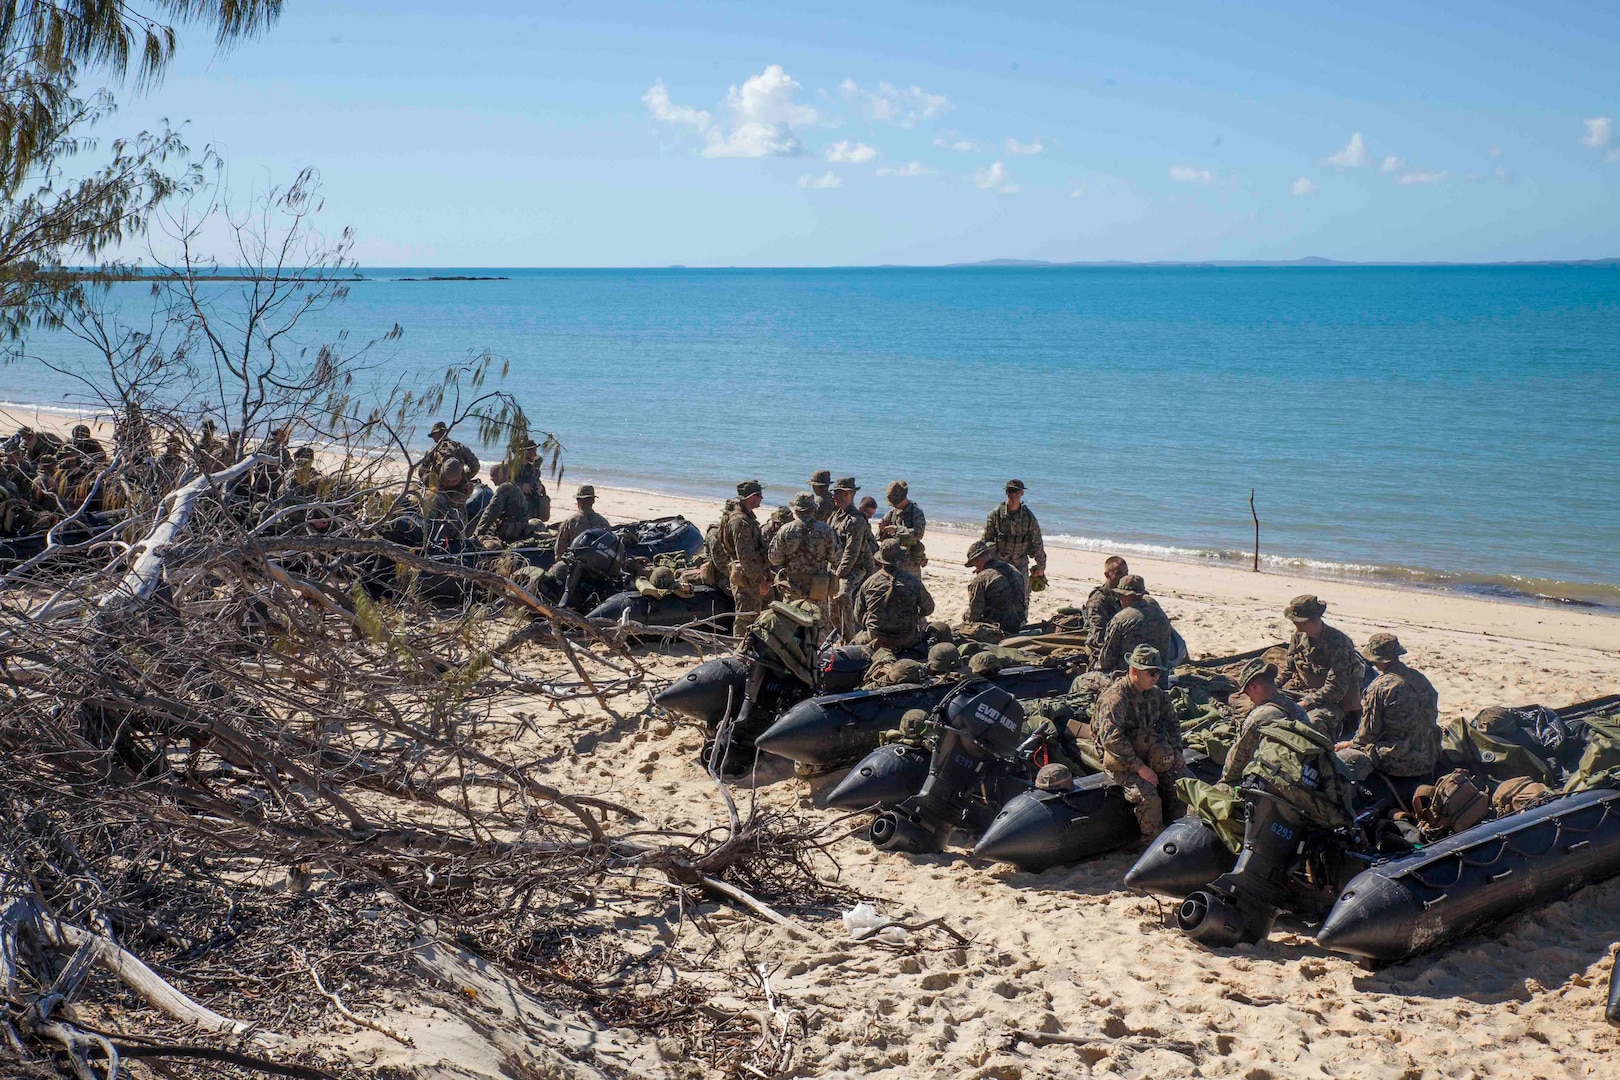 Marines with Lima Company, Battalion Landing Team, 3rd Battalion, 5th Marines, 31st Marine Expeditionary Unit, stage Combat Rubber Raiding Crafts off the coast of Australia during an amphibious landing as part of Talisman Saber 17, July 15th, 2017. Talisman Saber is a biennial exercise designed to improve the interoperability between Australian and U.S. forces. The 31st MEU is taking part in Talisman Saber 17 while deployed on its regularly-scheduled patrol of the Indo-Asia-Pacific region. (U.S. Marine Corps photo by Lance Cpl. Jonah Baase/Released)